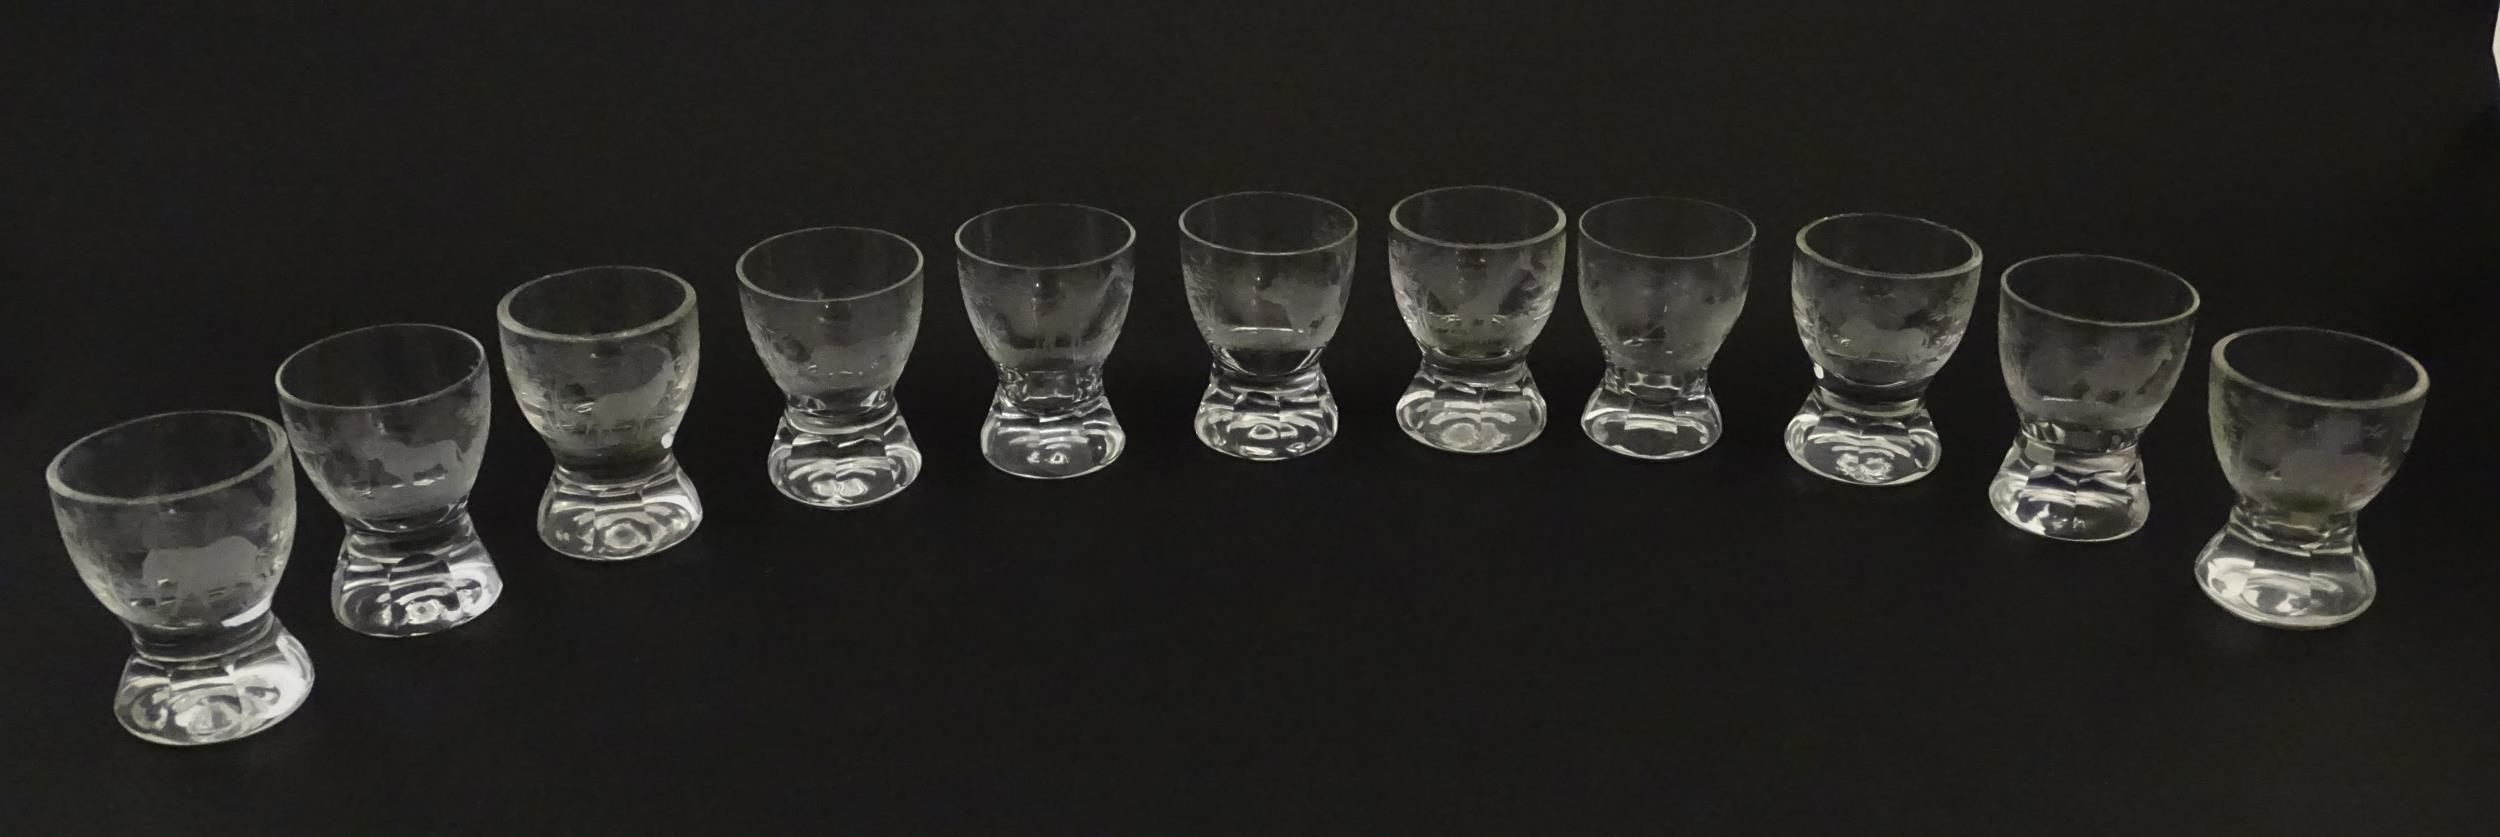 Rowland Ward sherry / liquor glasses with engraved Safari animal detail. Unsigned. Largest approx. - Image 21 of 26